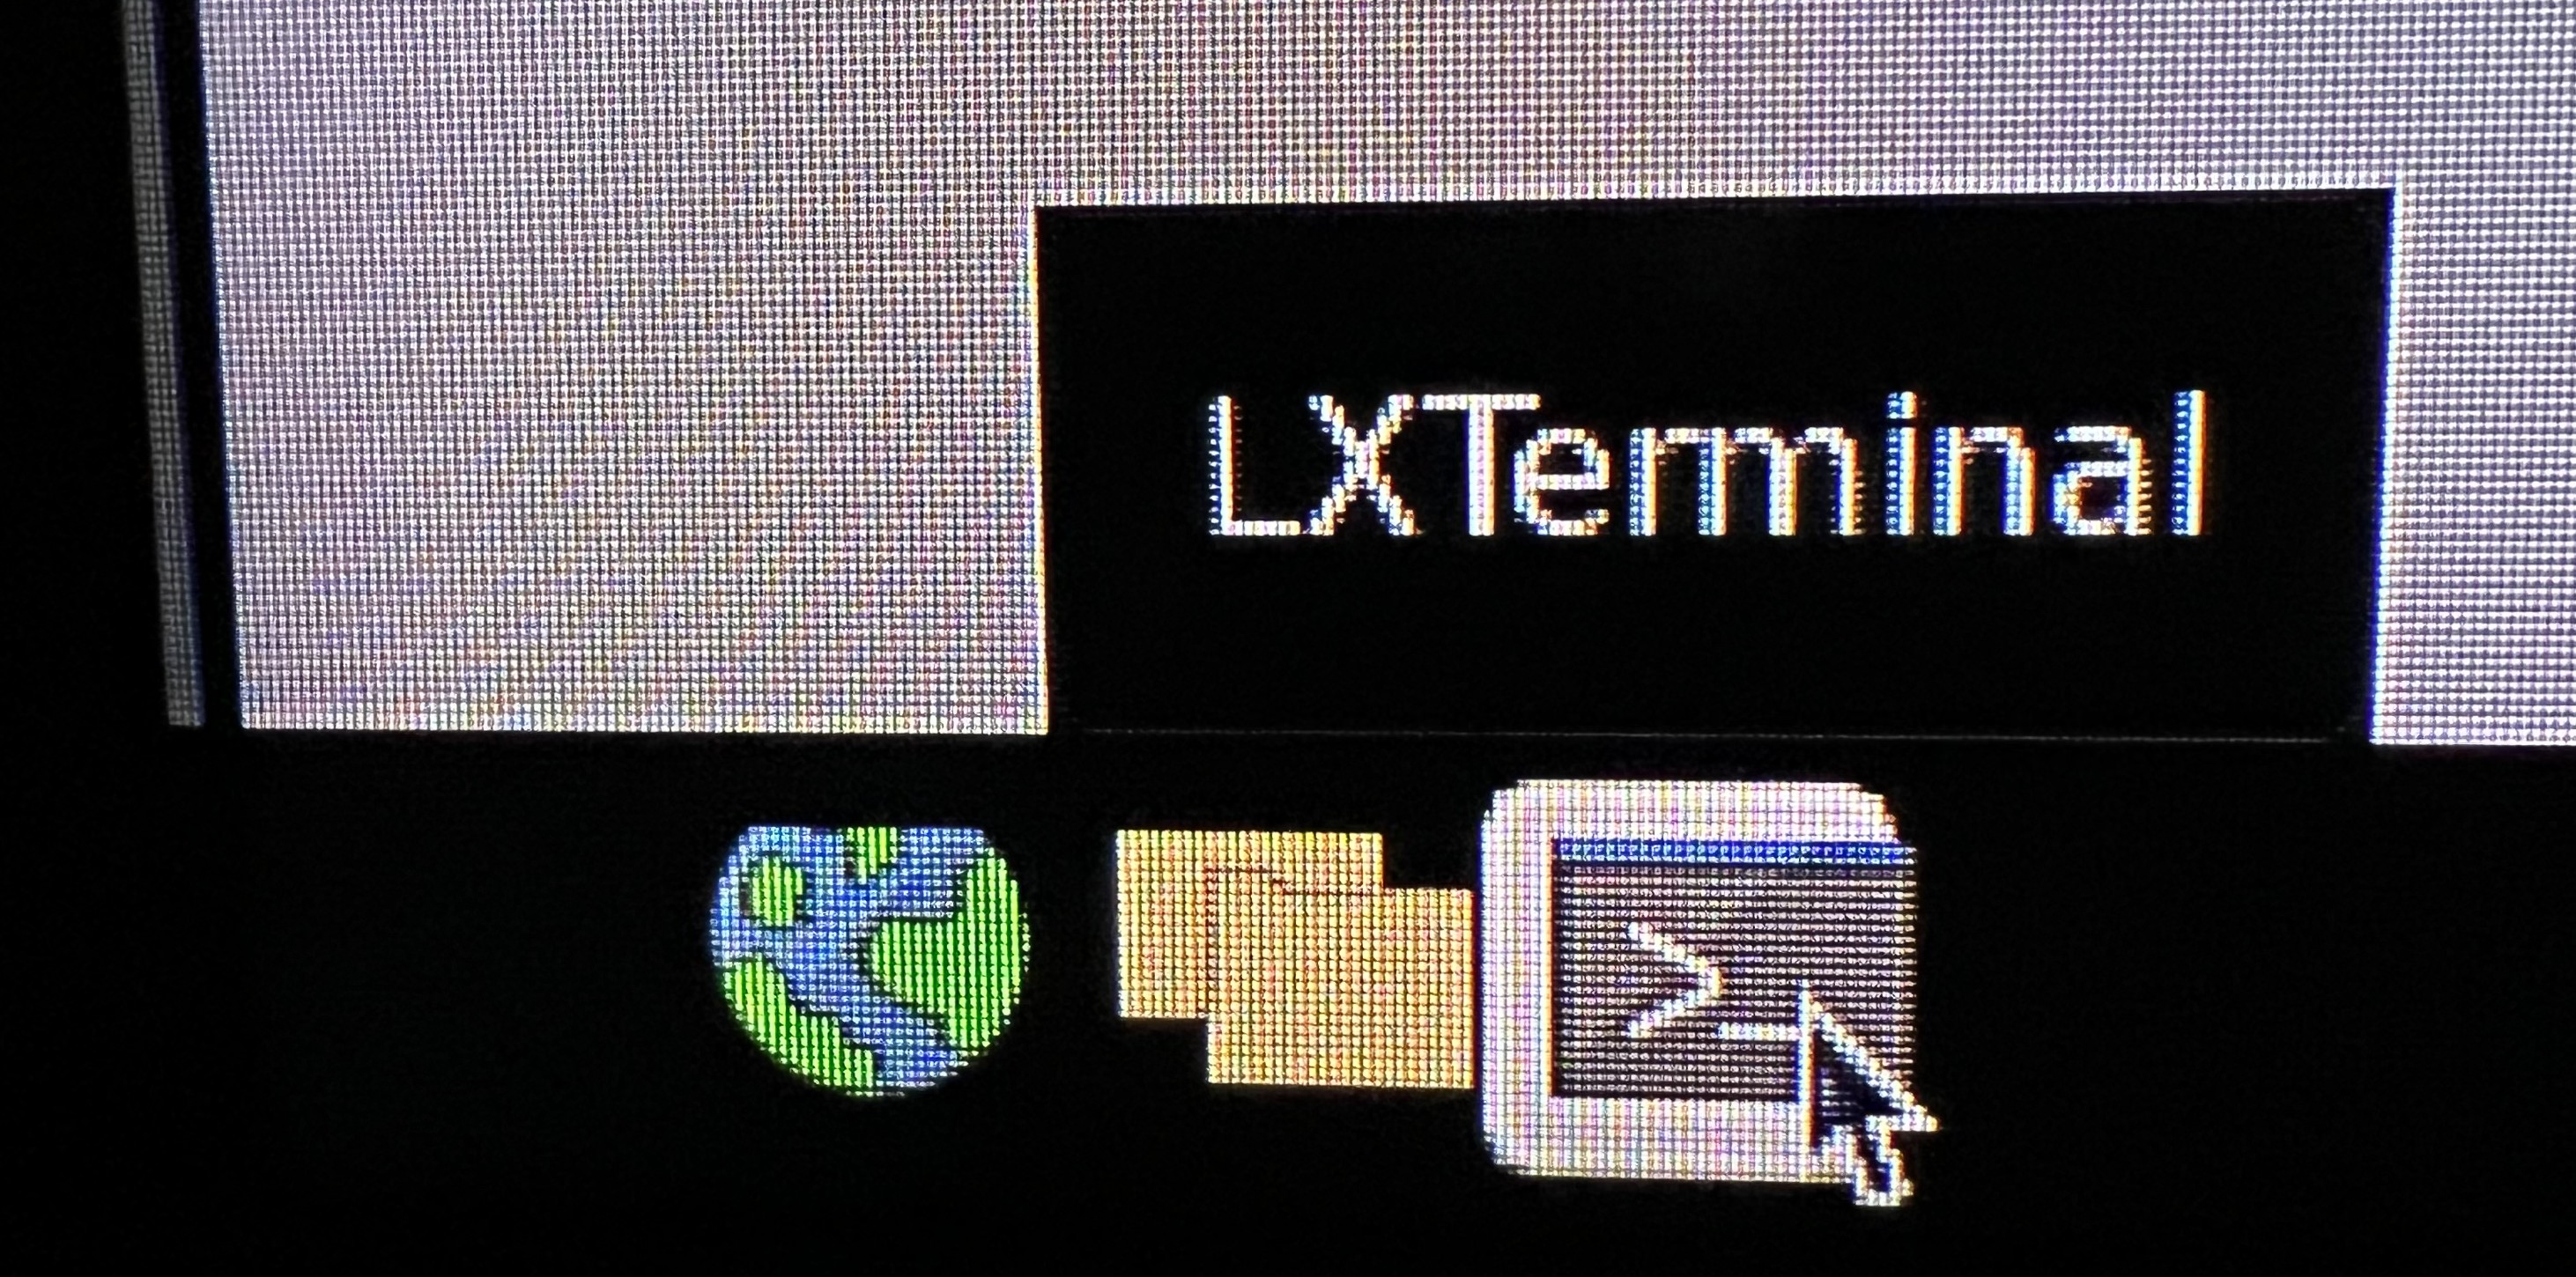 How to start the Terminal